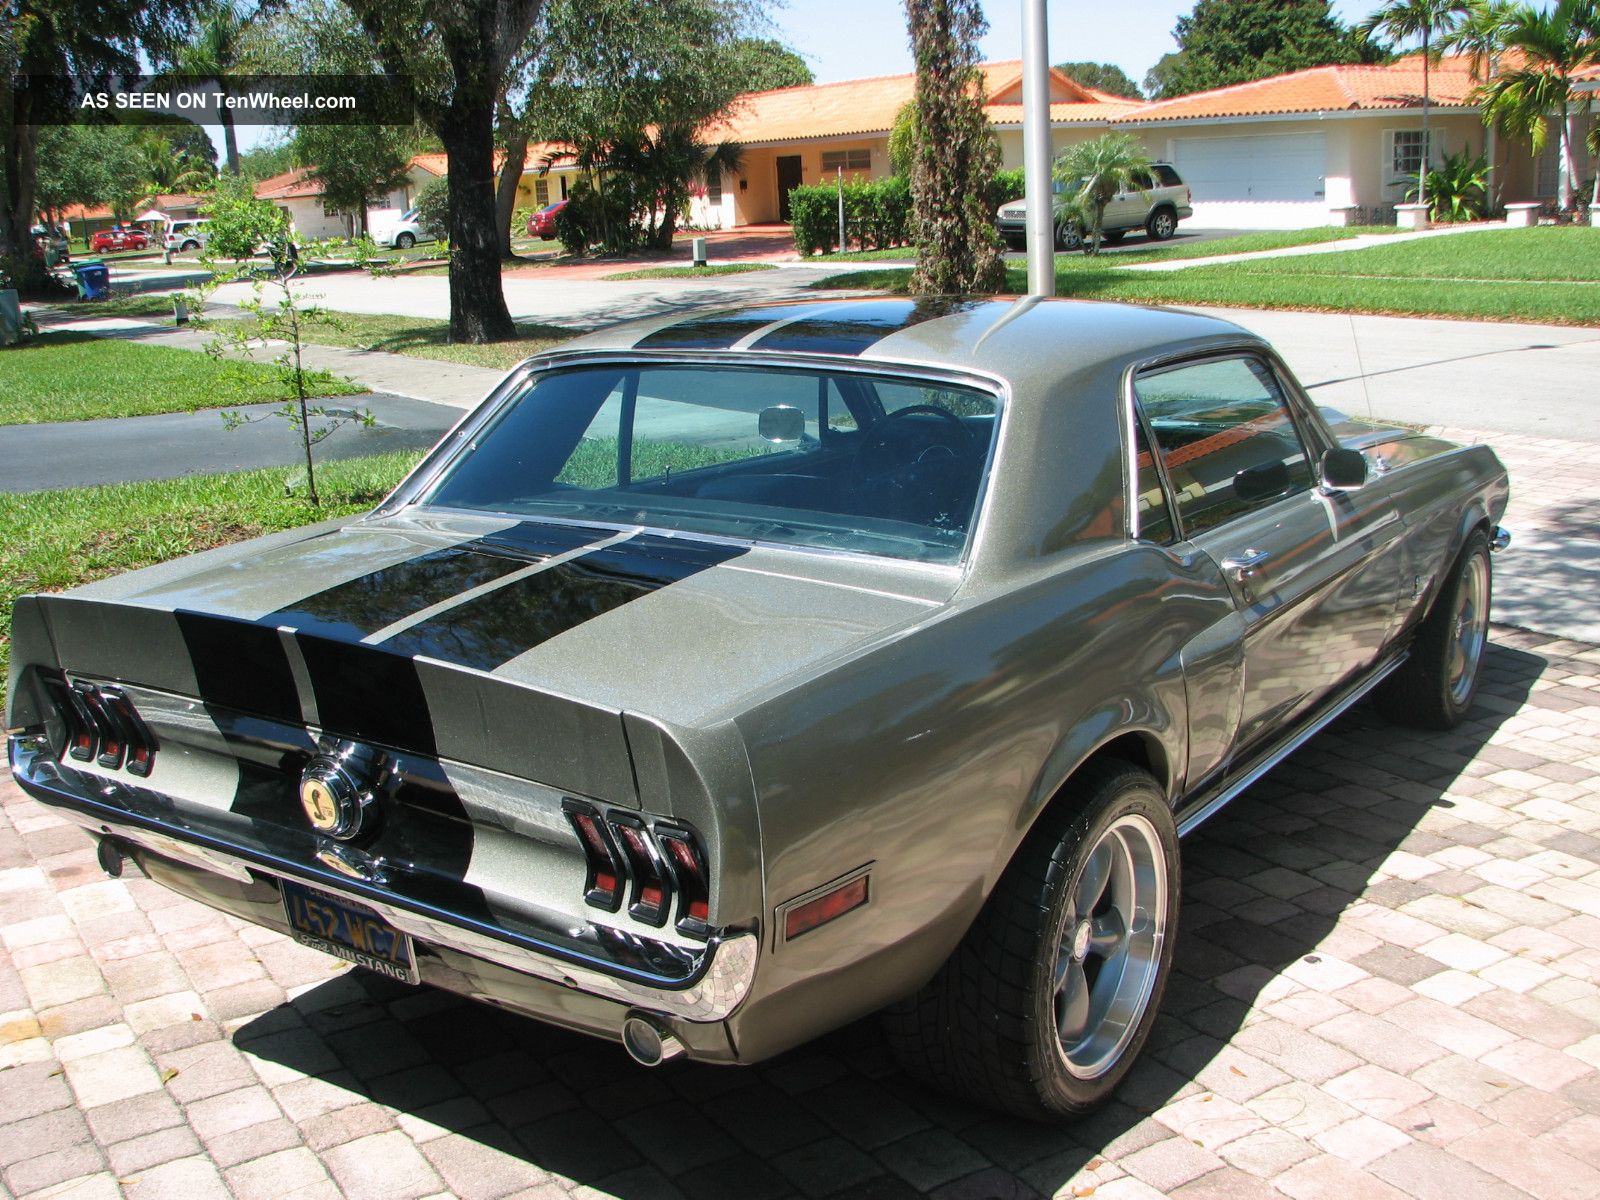 1968 Ford Mustang Shelby Cobra Gt - 500 Eleanor Tribute 289 Eng.